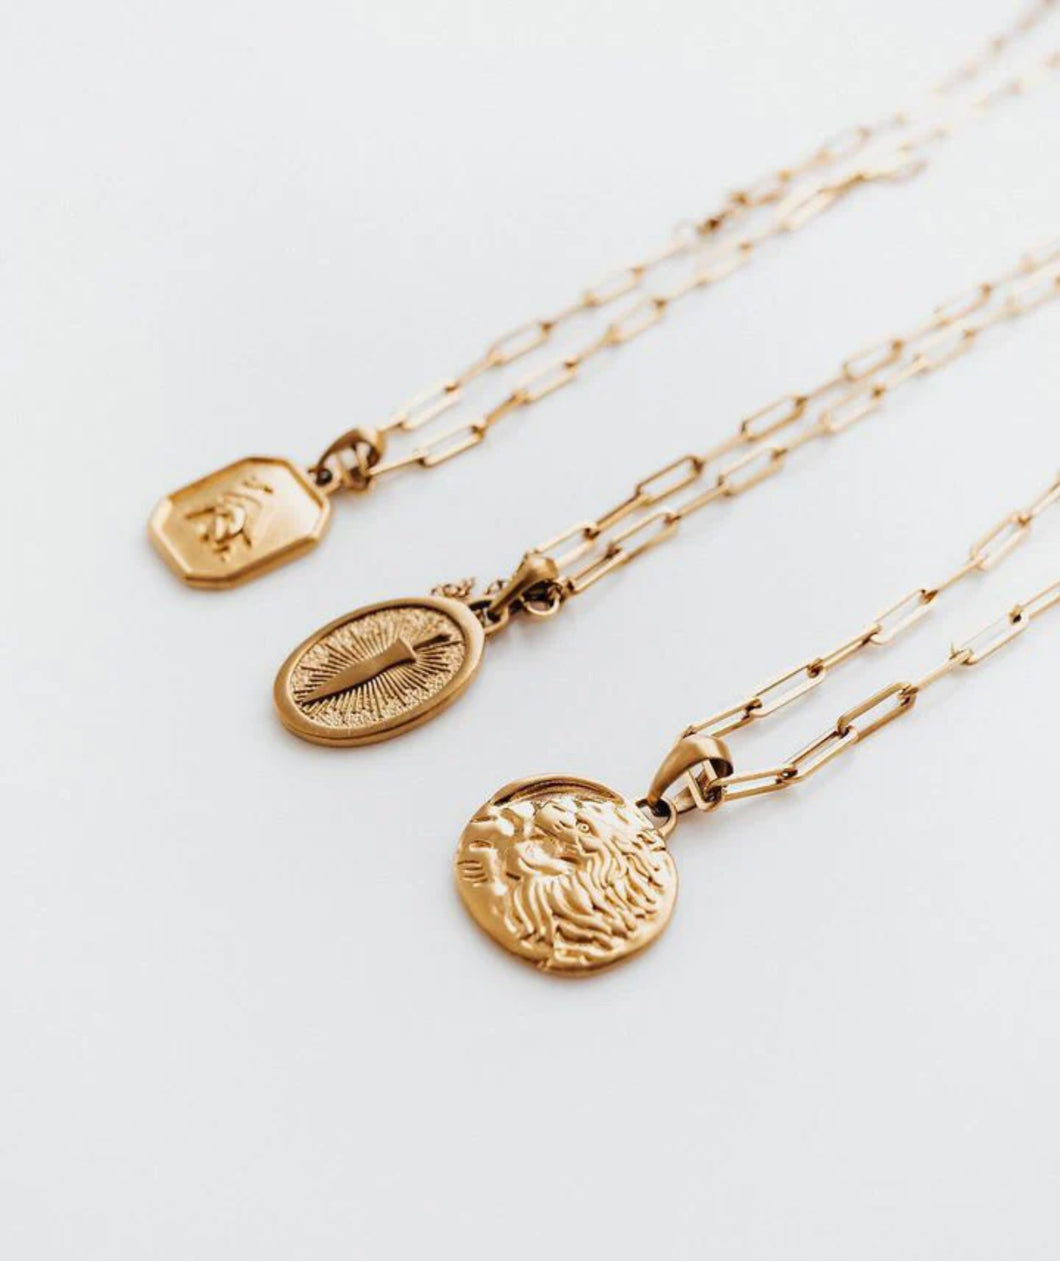 LA VENA LAYERED NECKLACES- 18 K GOLD PLATED